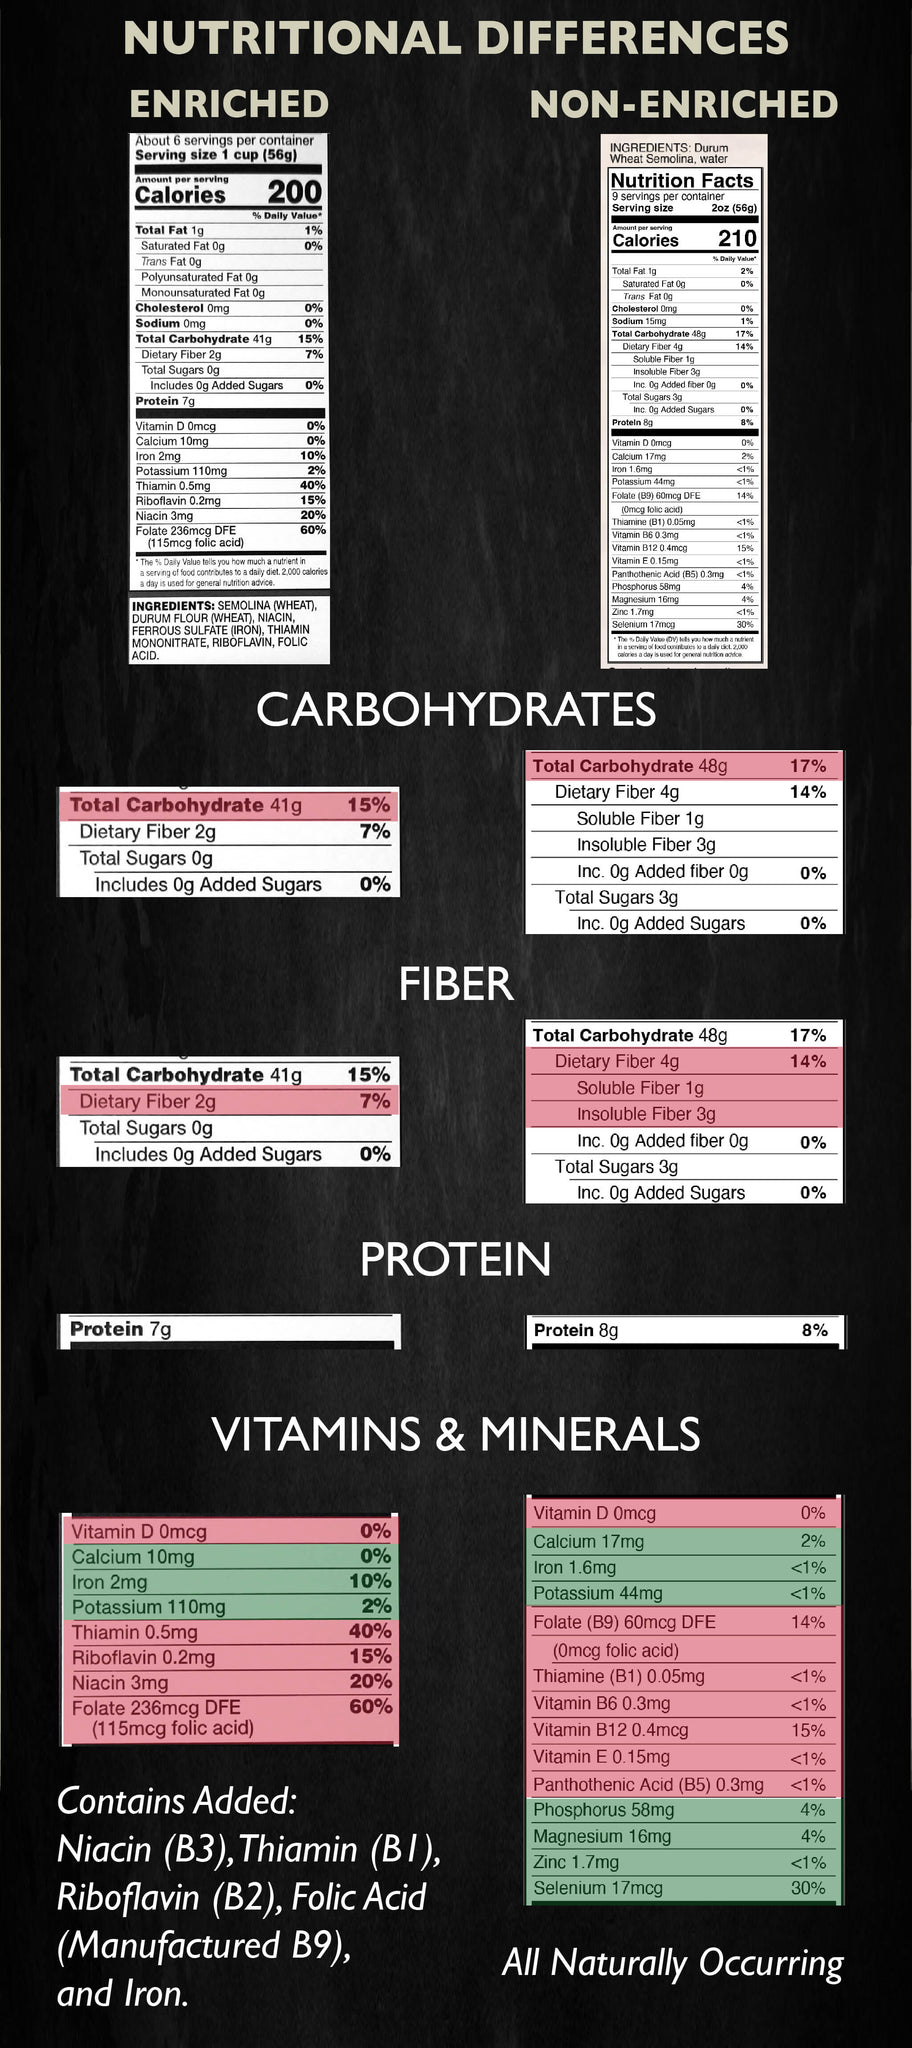 Side-by-side nutritional panel comparison for enriched and non-enriched pasta, highlighting and comparing carbohydrate, fiber, protein and B Vitamin content